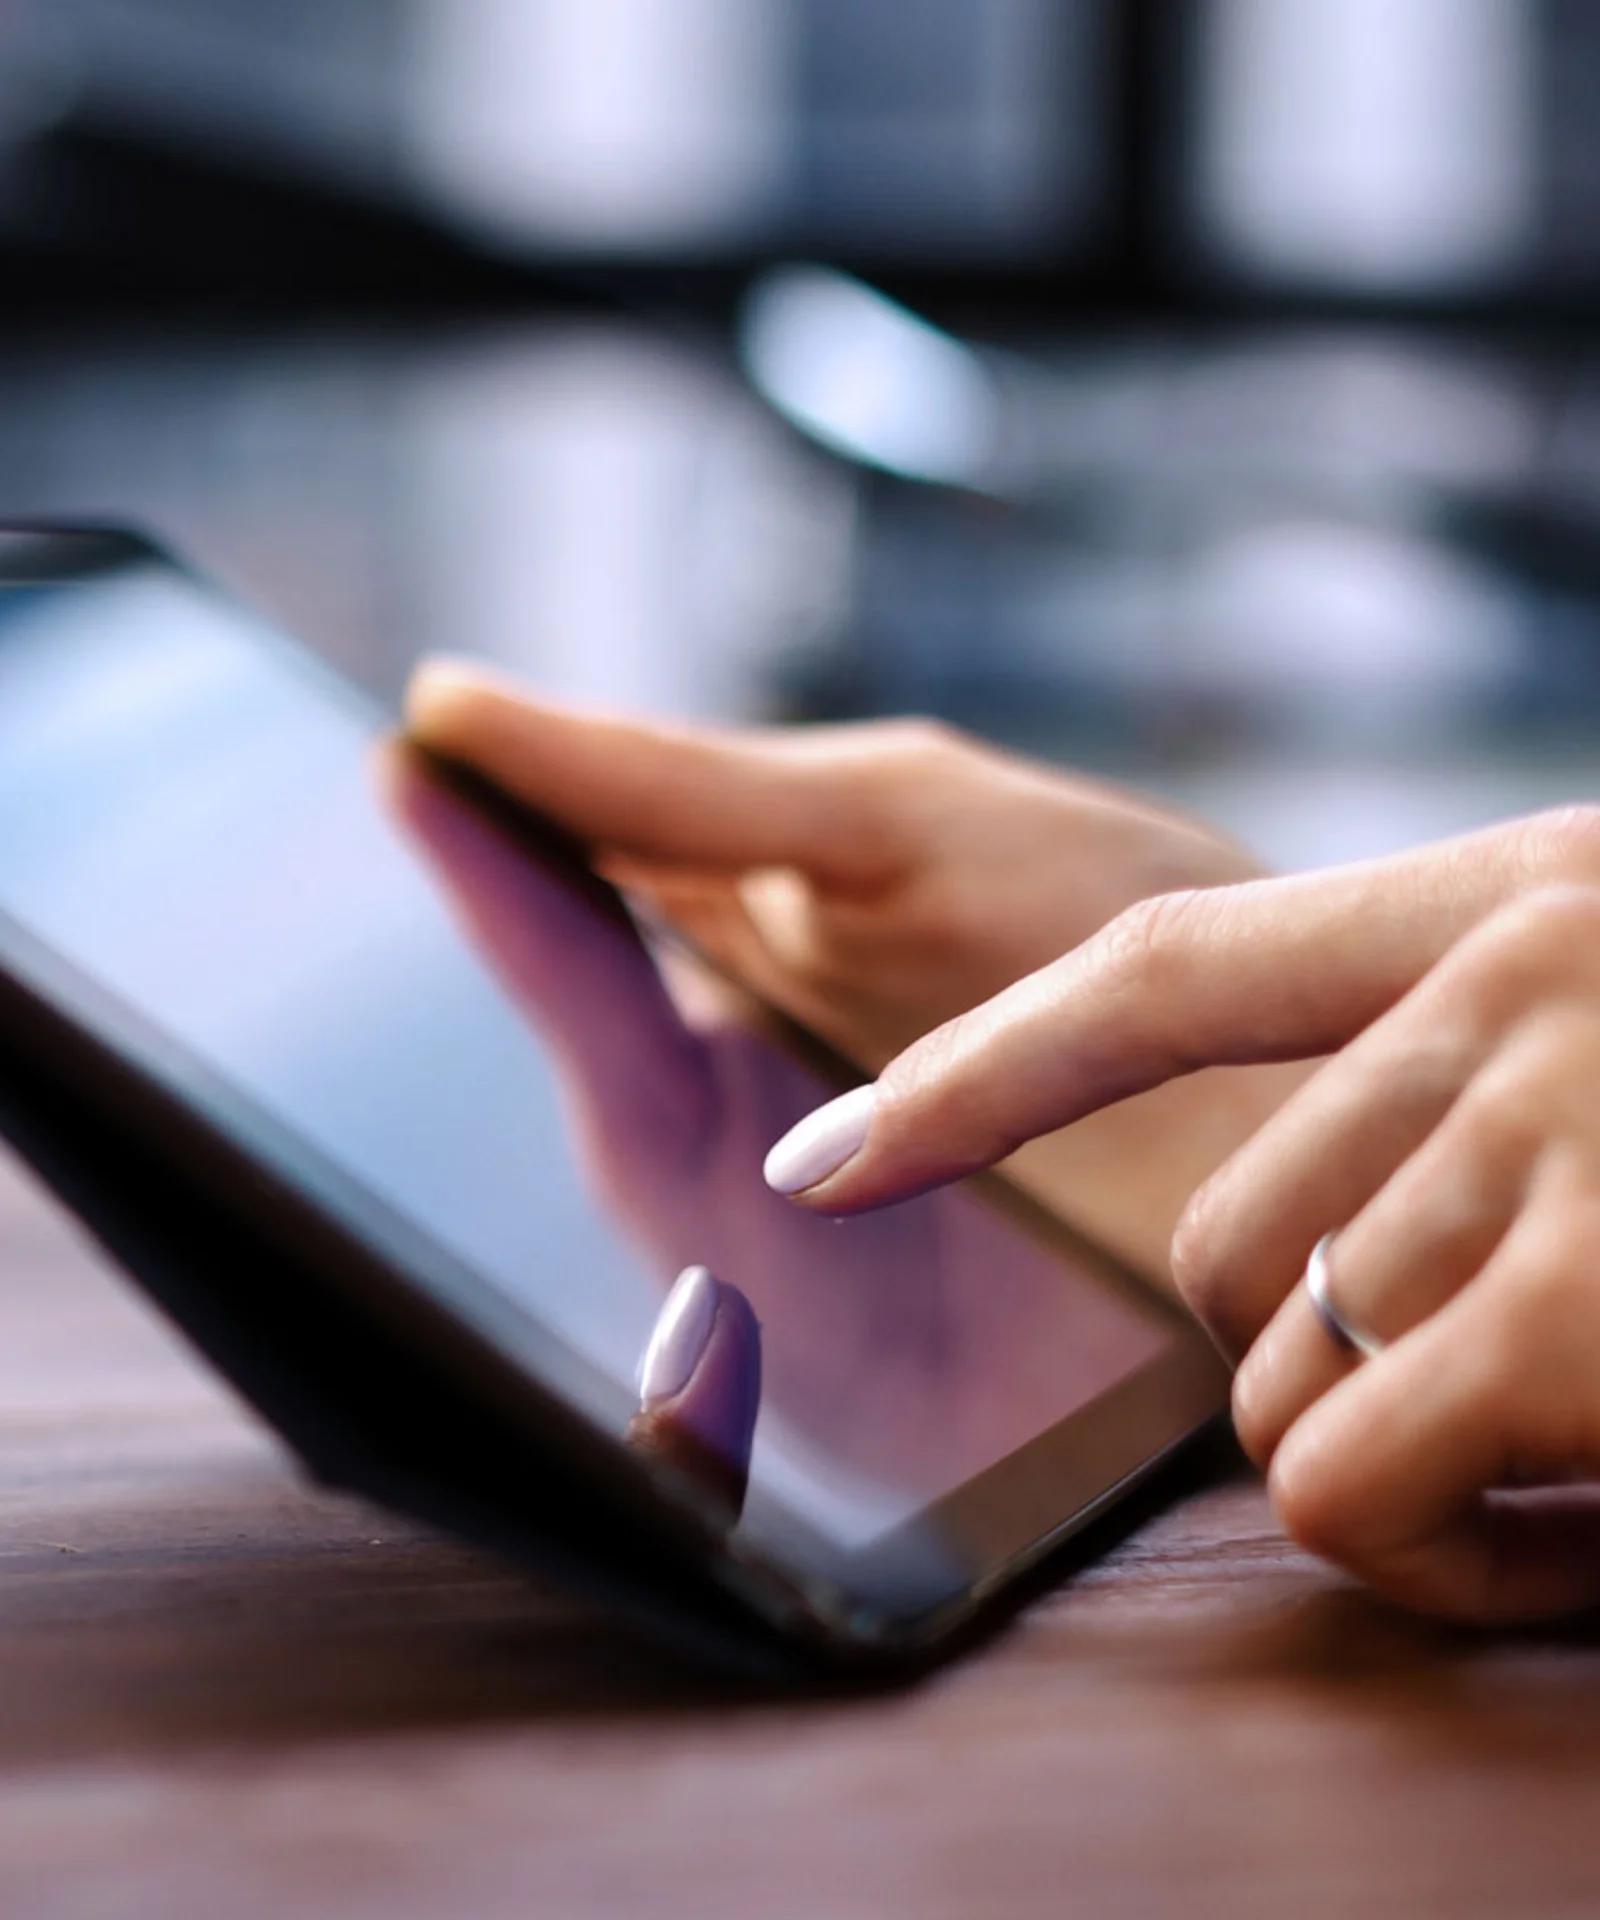 The image shows a close-up of hands using a tablet, with one hand tapping on the screen. The tablet is lying on a surface and the background is slightly blurred, suggesting an interior space. The focus is on the interaction with the tablet.